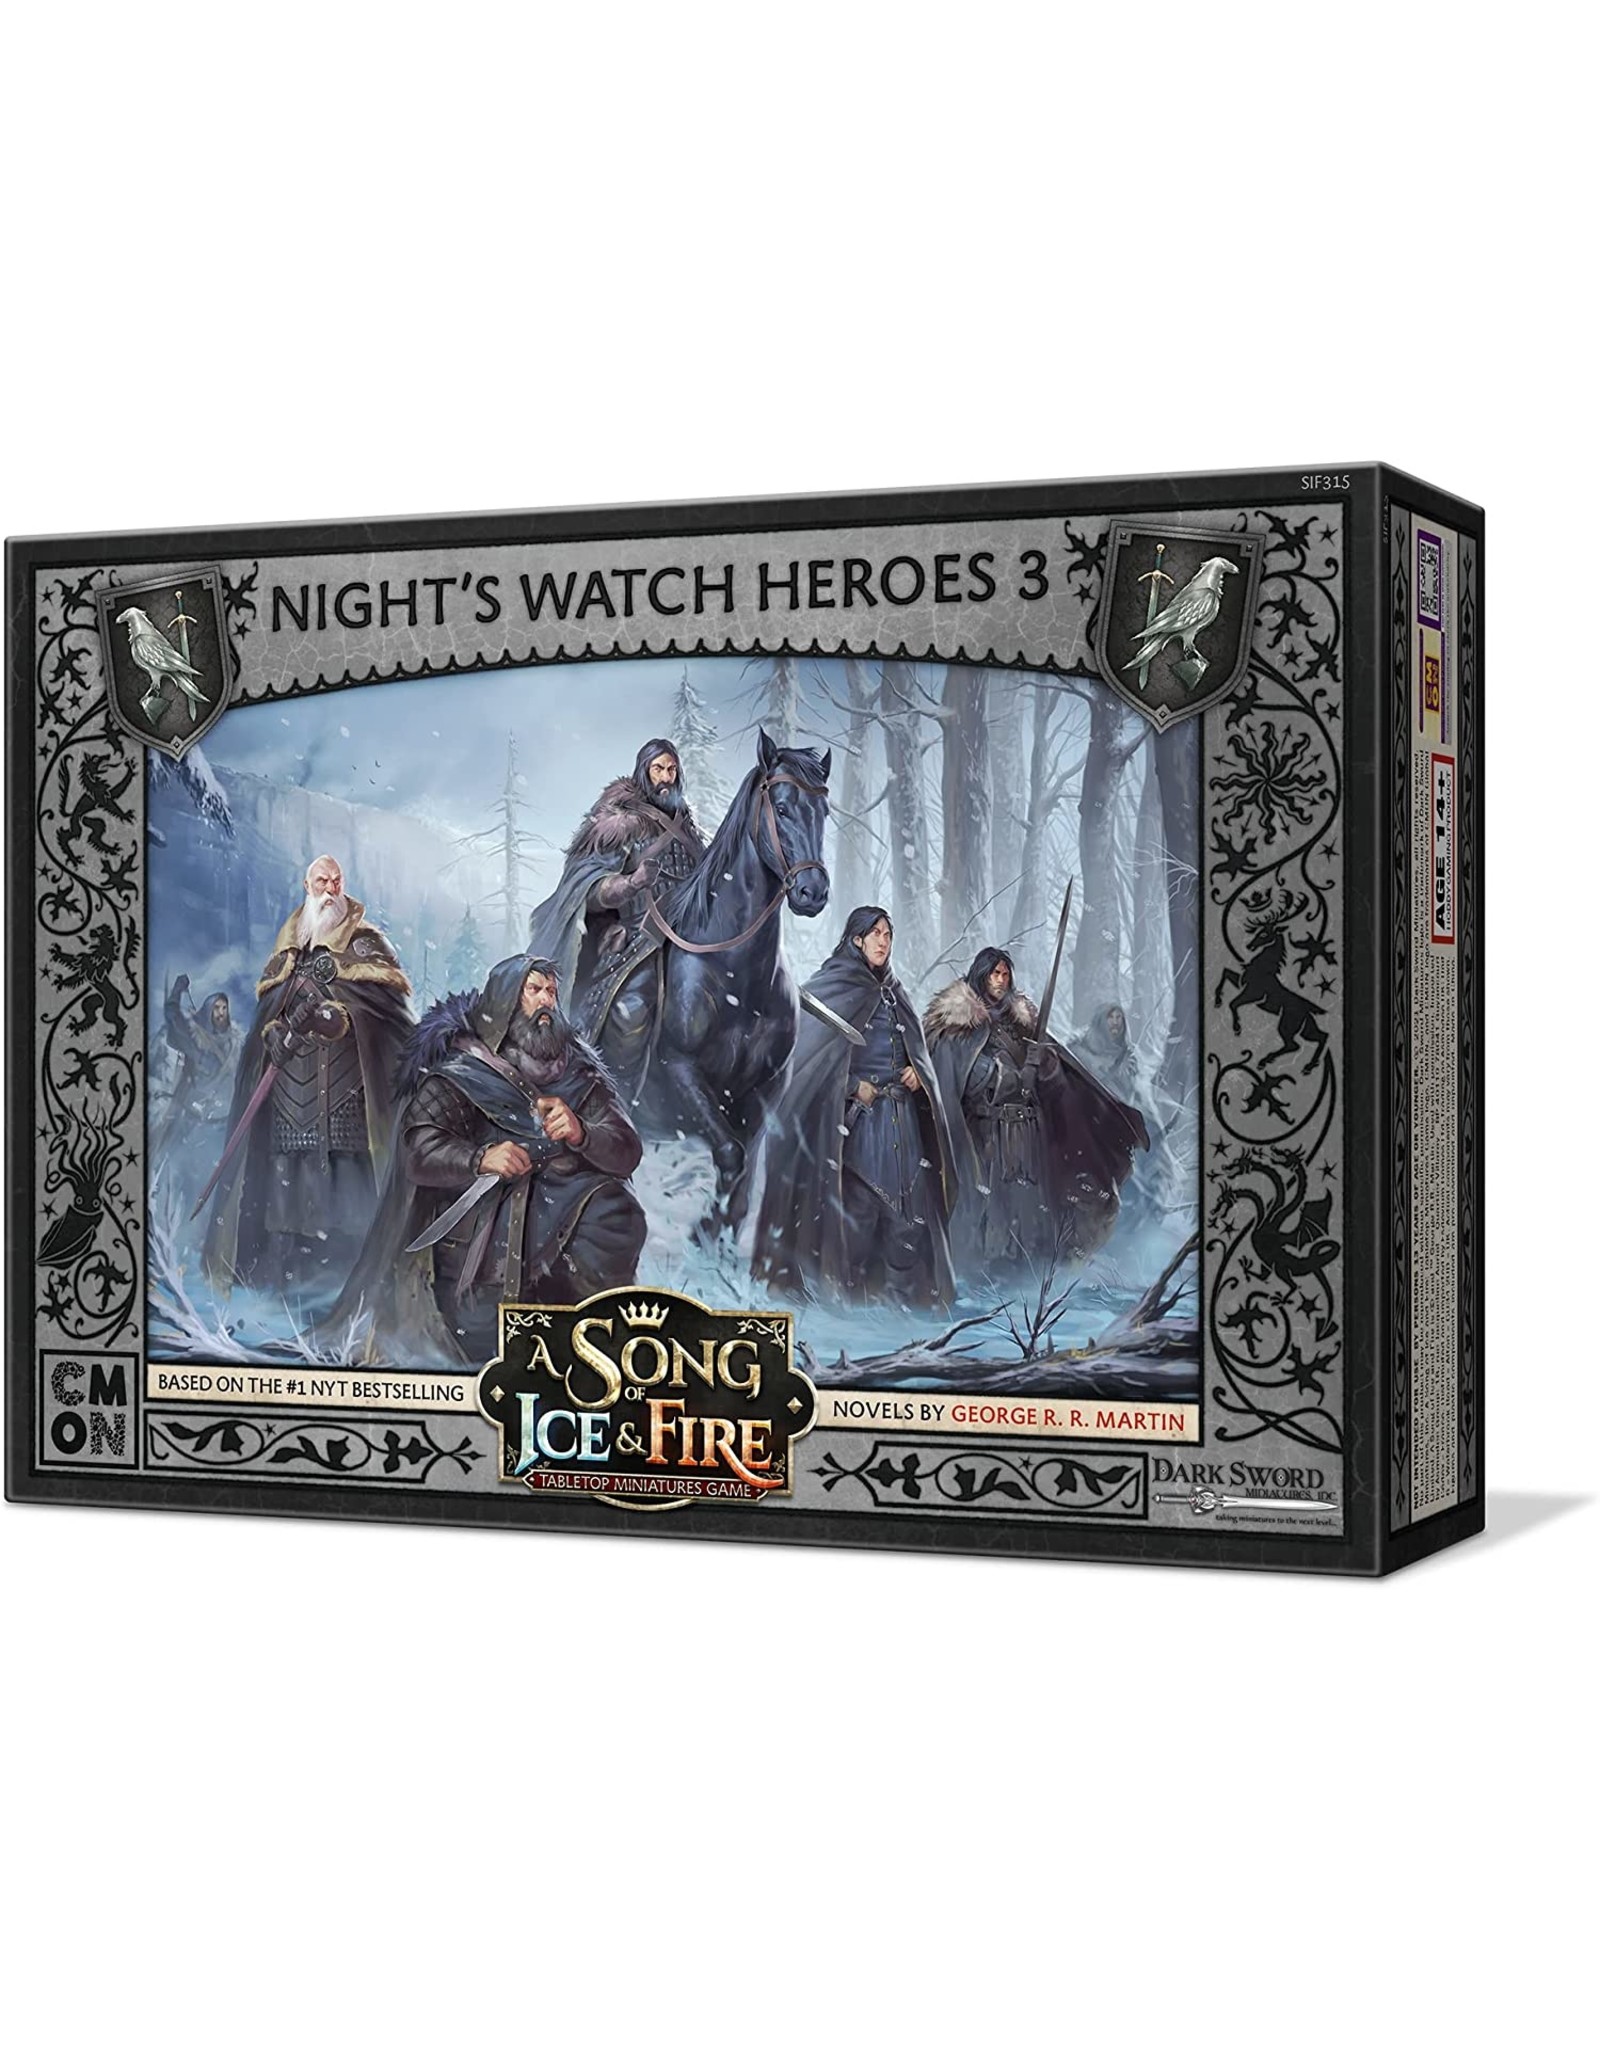 Cool Mini or Not A Song of Ice & Fire Tabletop Miniatures Game: NIGHT'S WATCH HEROES 3